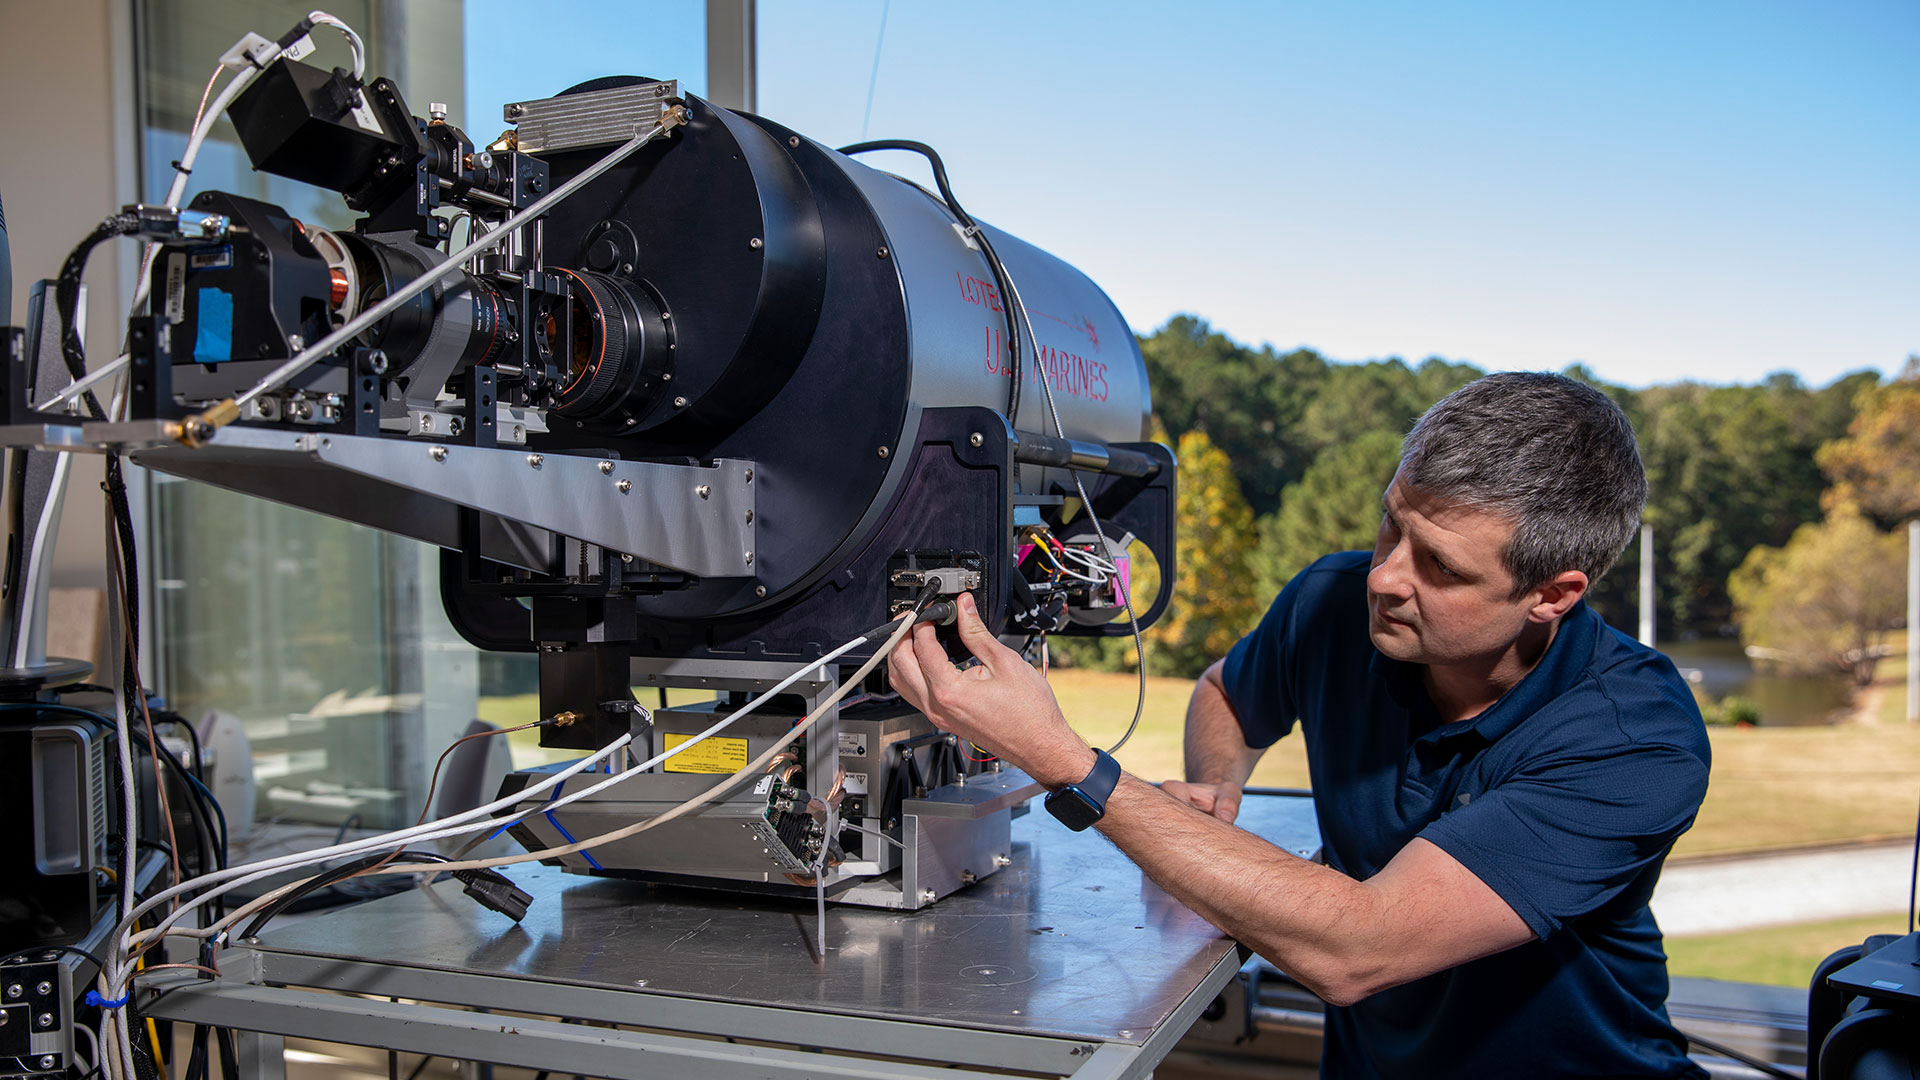 Male researcher examines large round metal Lidar system device.